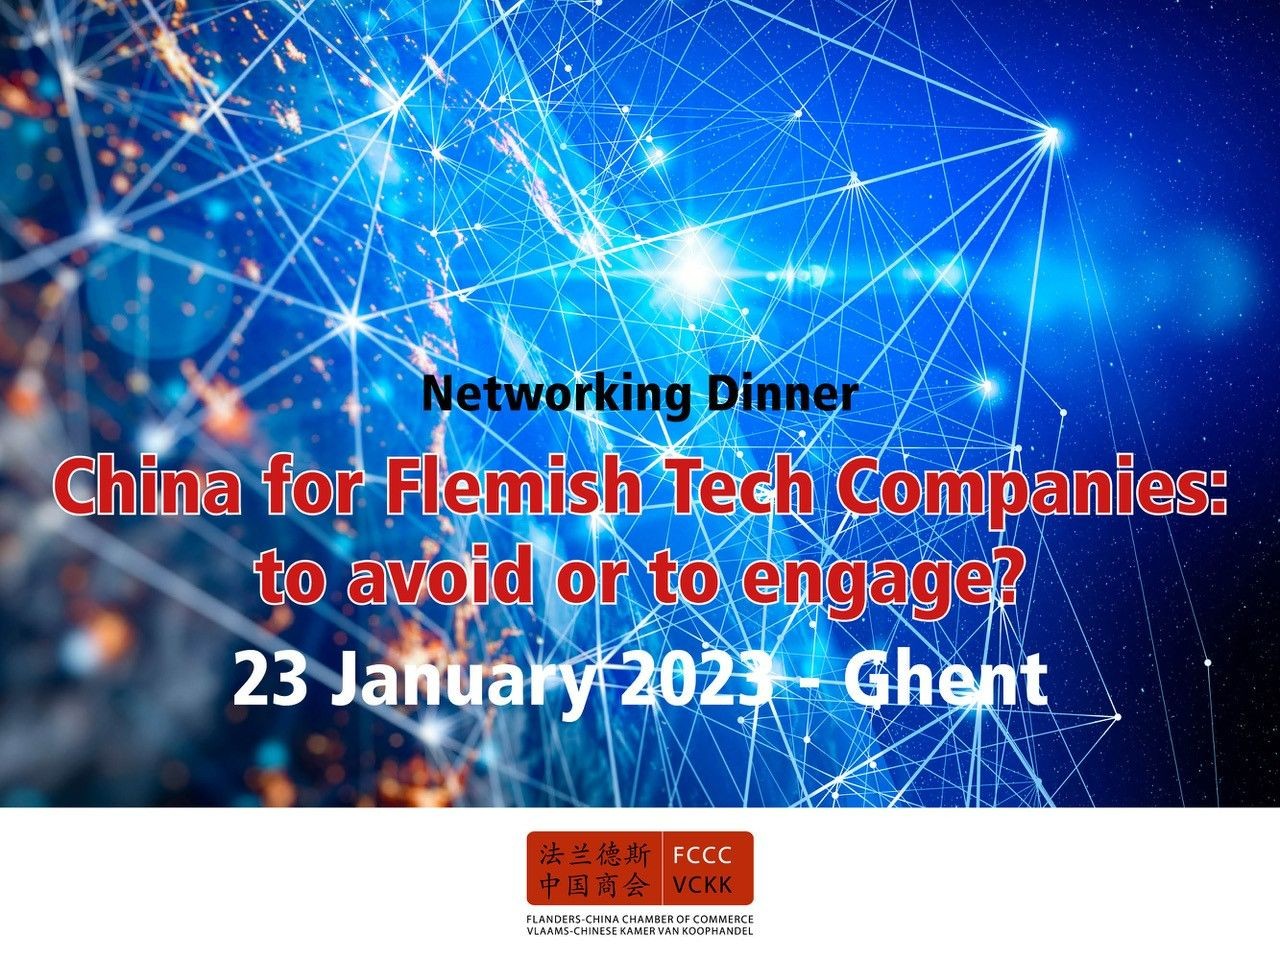 Networking Dinner: “China for Flemish Tech Companies: to avoid or to engage? ”  23 January 2023 - Ghent